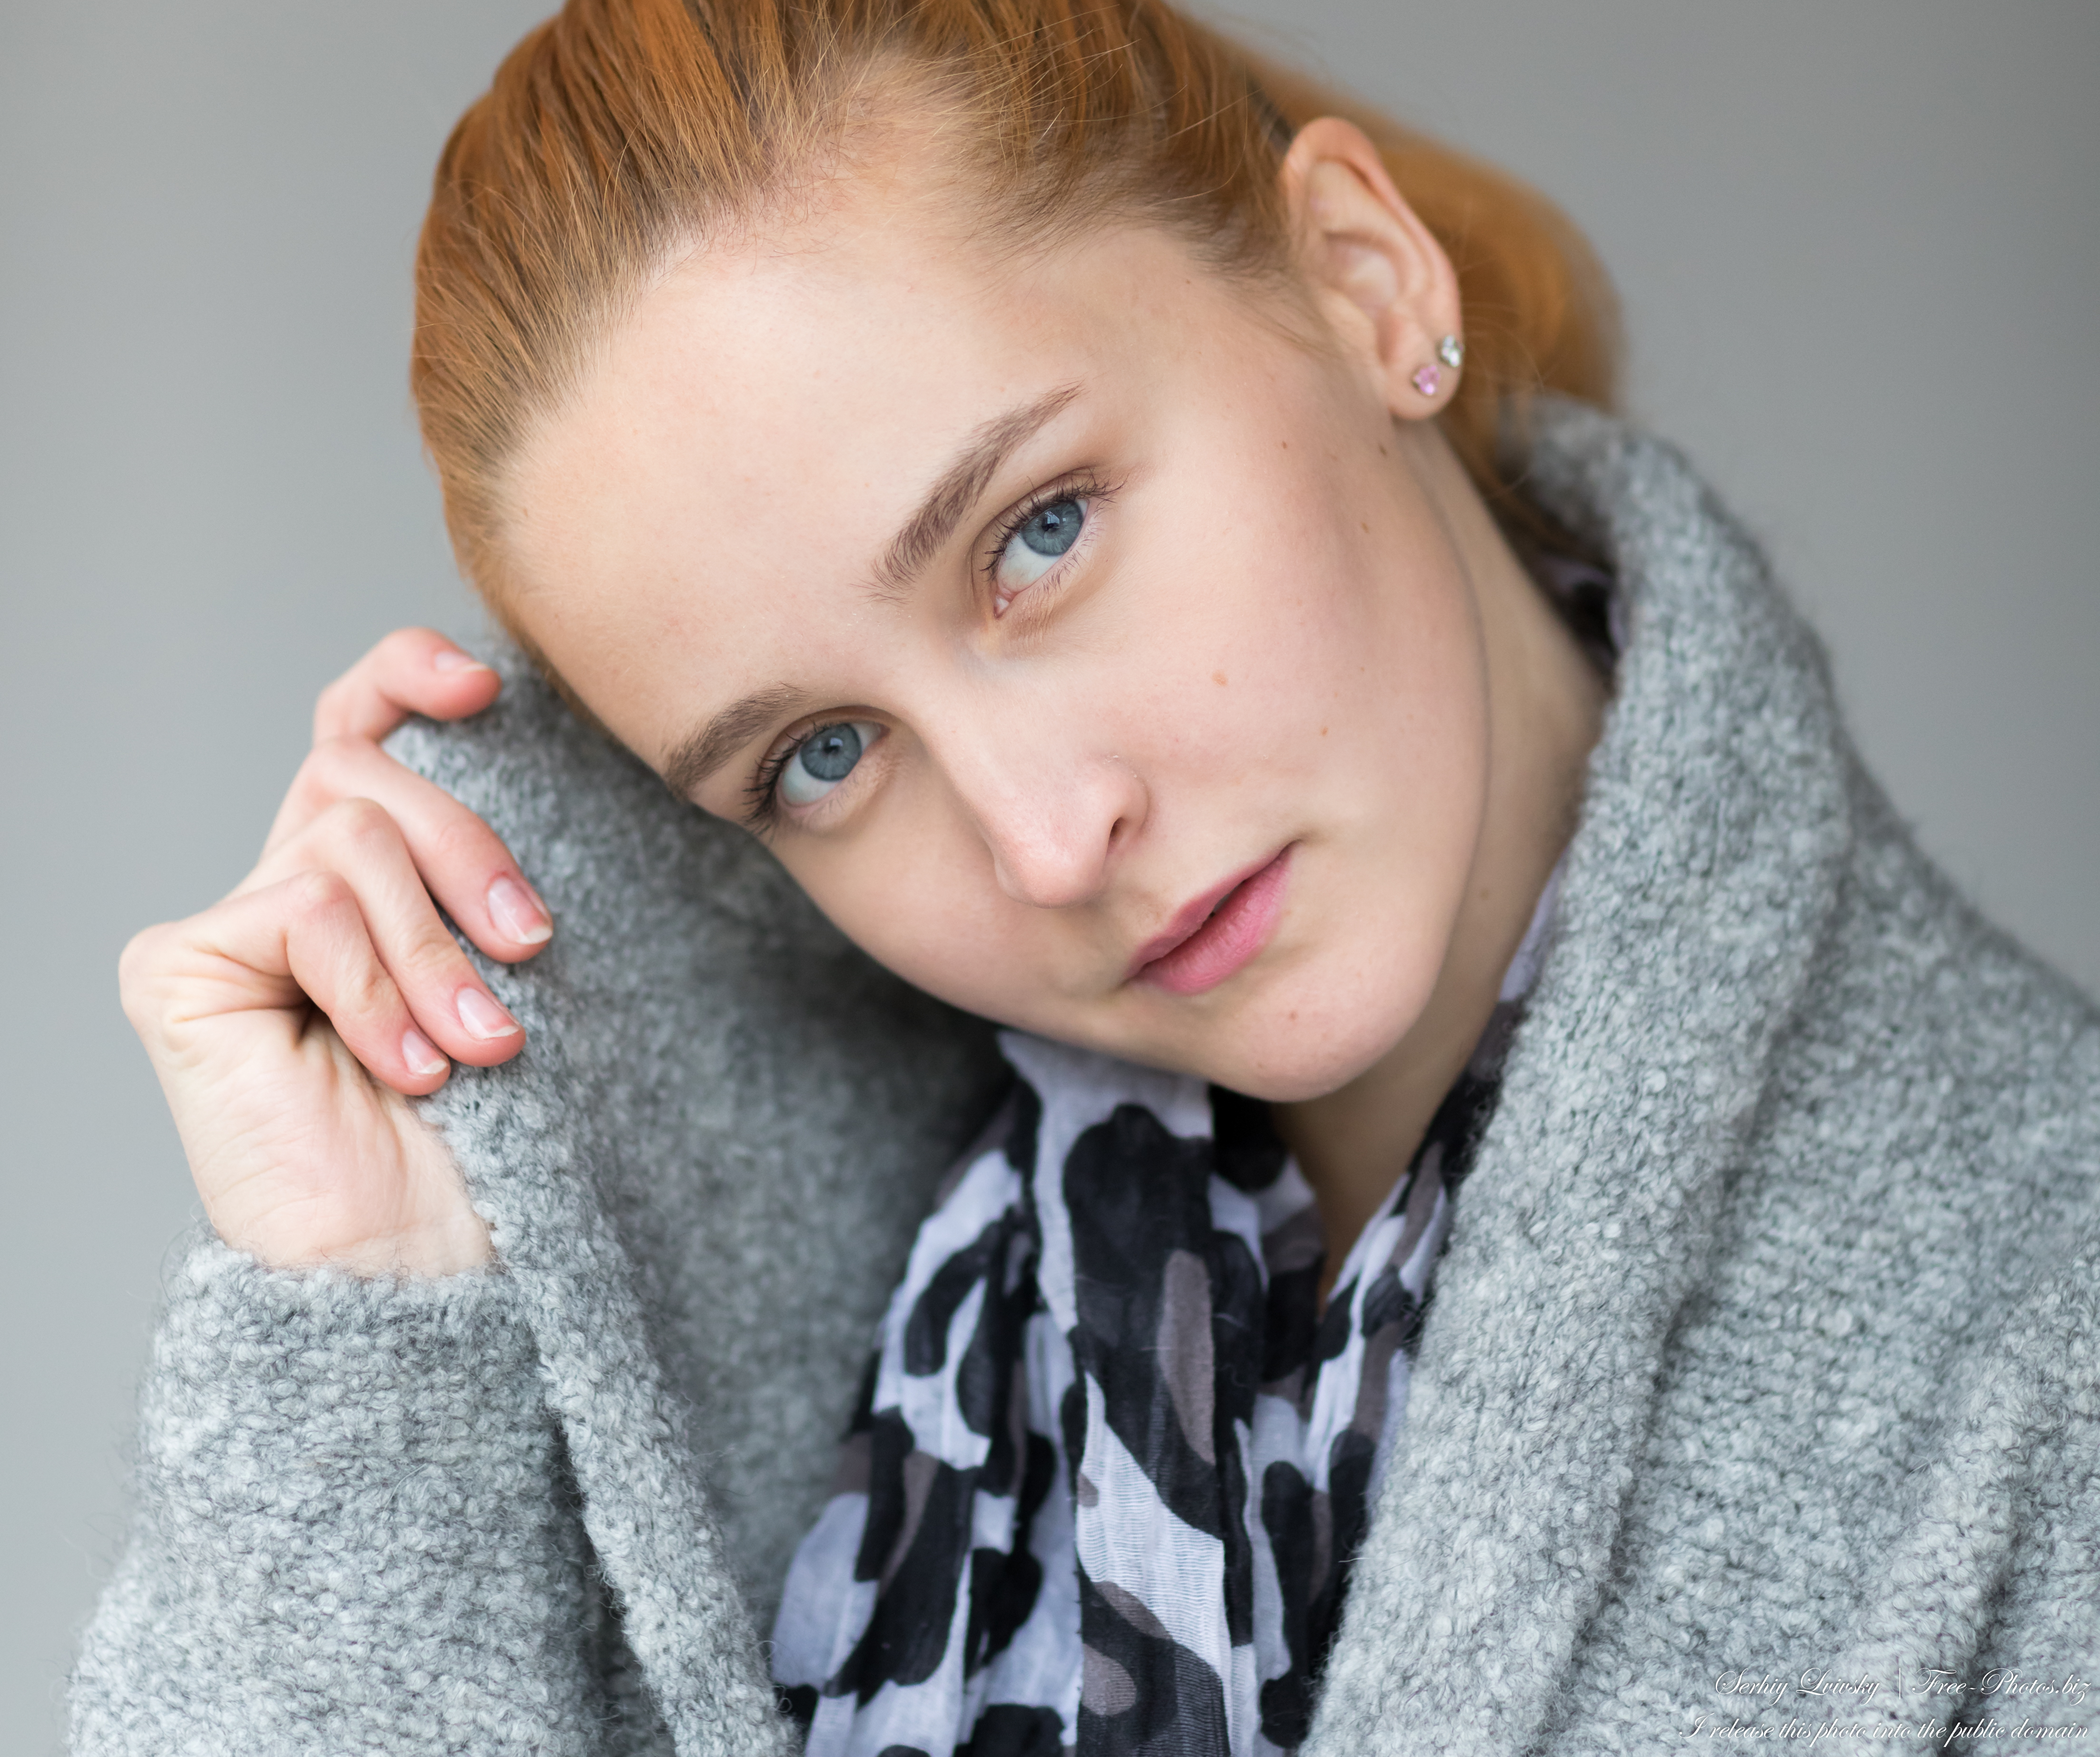 Ksenia - a 25-year-old girl with blue eyes and dyed hair photographed in November 2021 by Serhiy Lvivsky, portrait 3